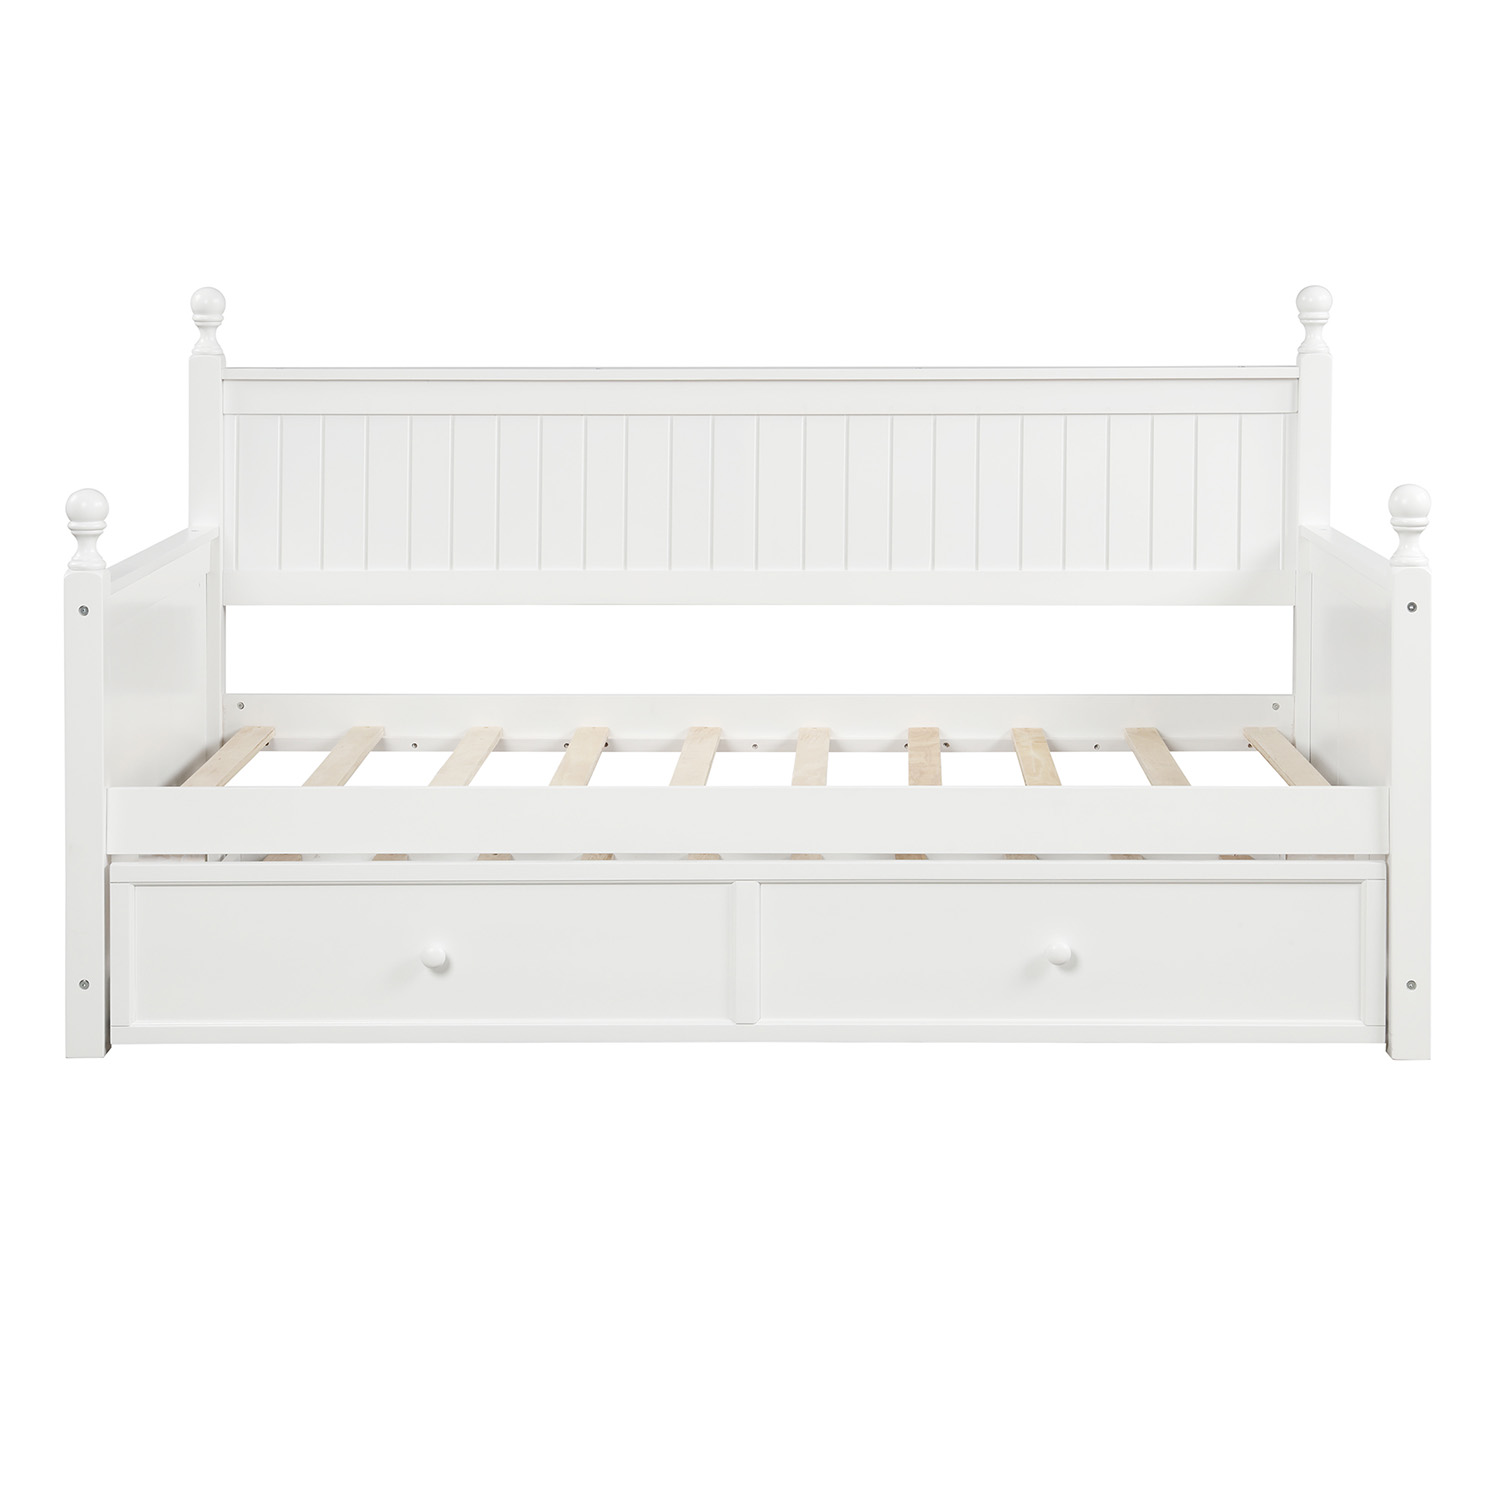 Kepooman Twin Size Modern Wooden Daybed Frame with Twin Size Trundle & Headboard for Bedroom Dorm, 80.5" x 42.1" x 45.41", White - image 3 of 16